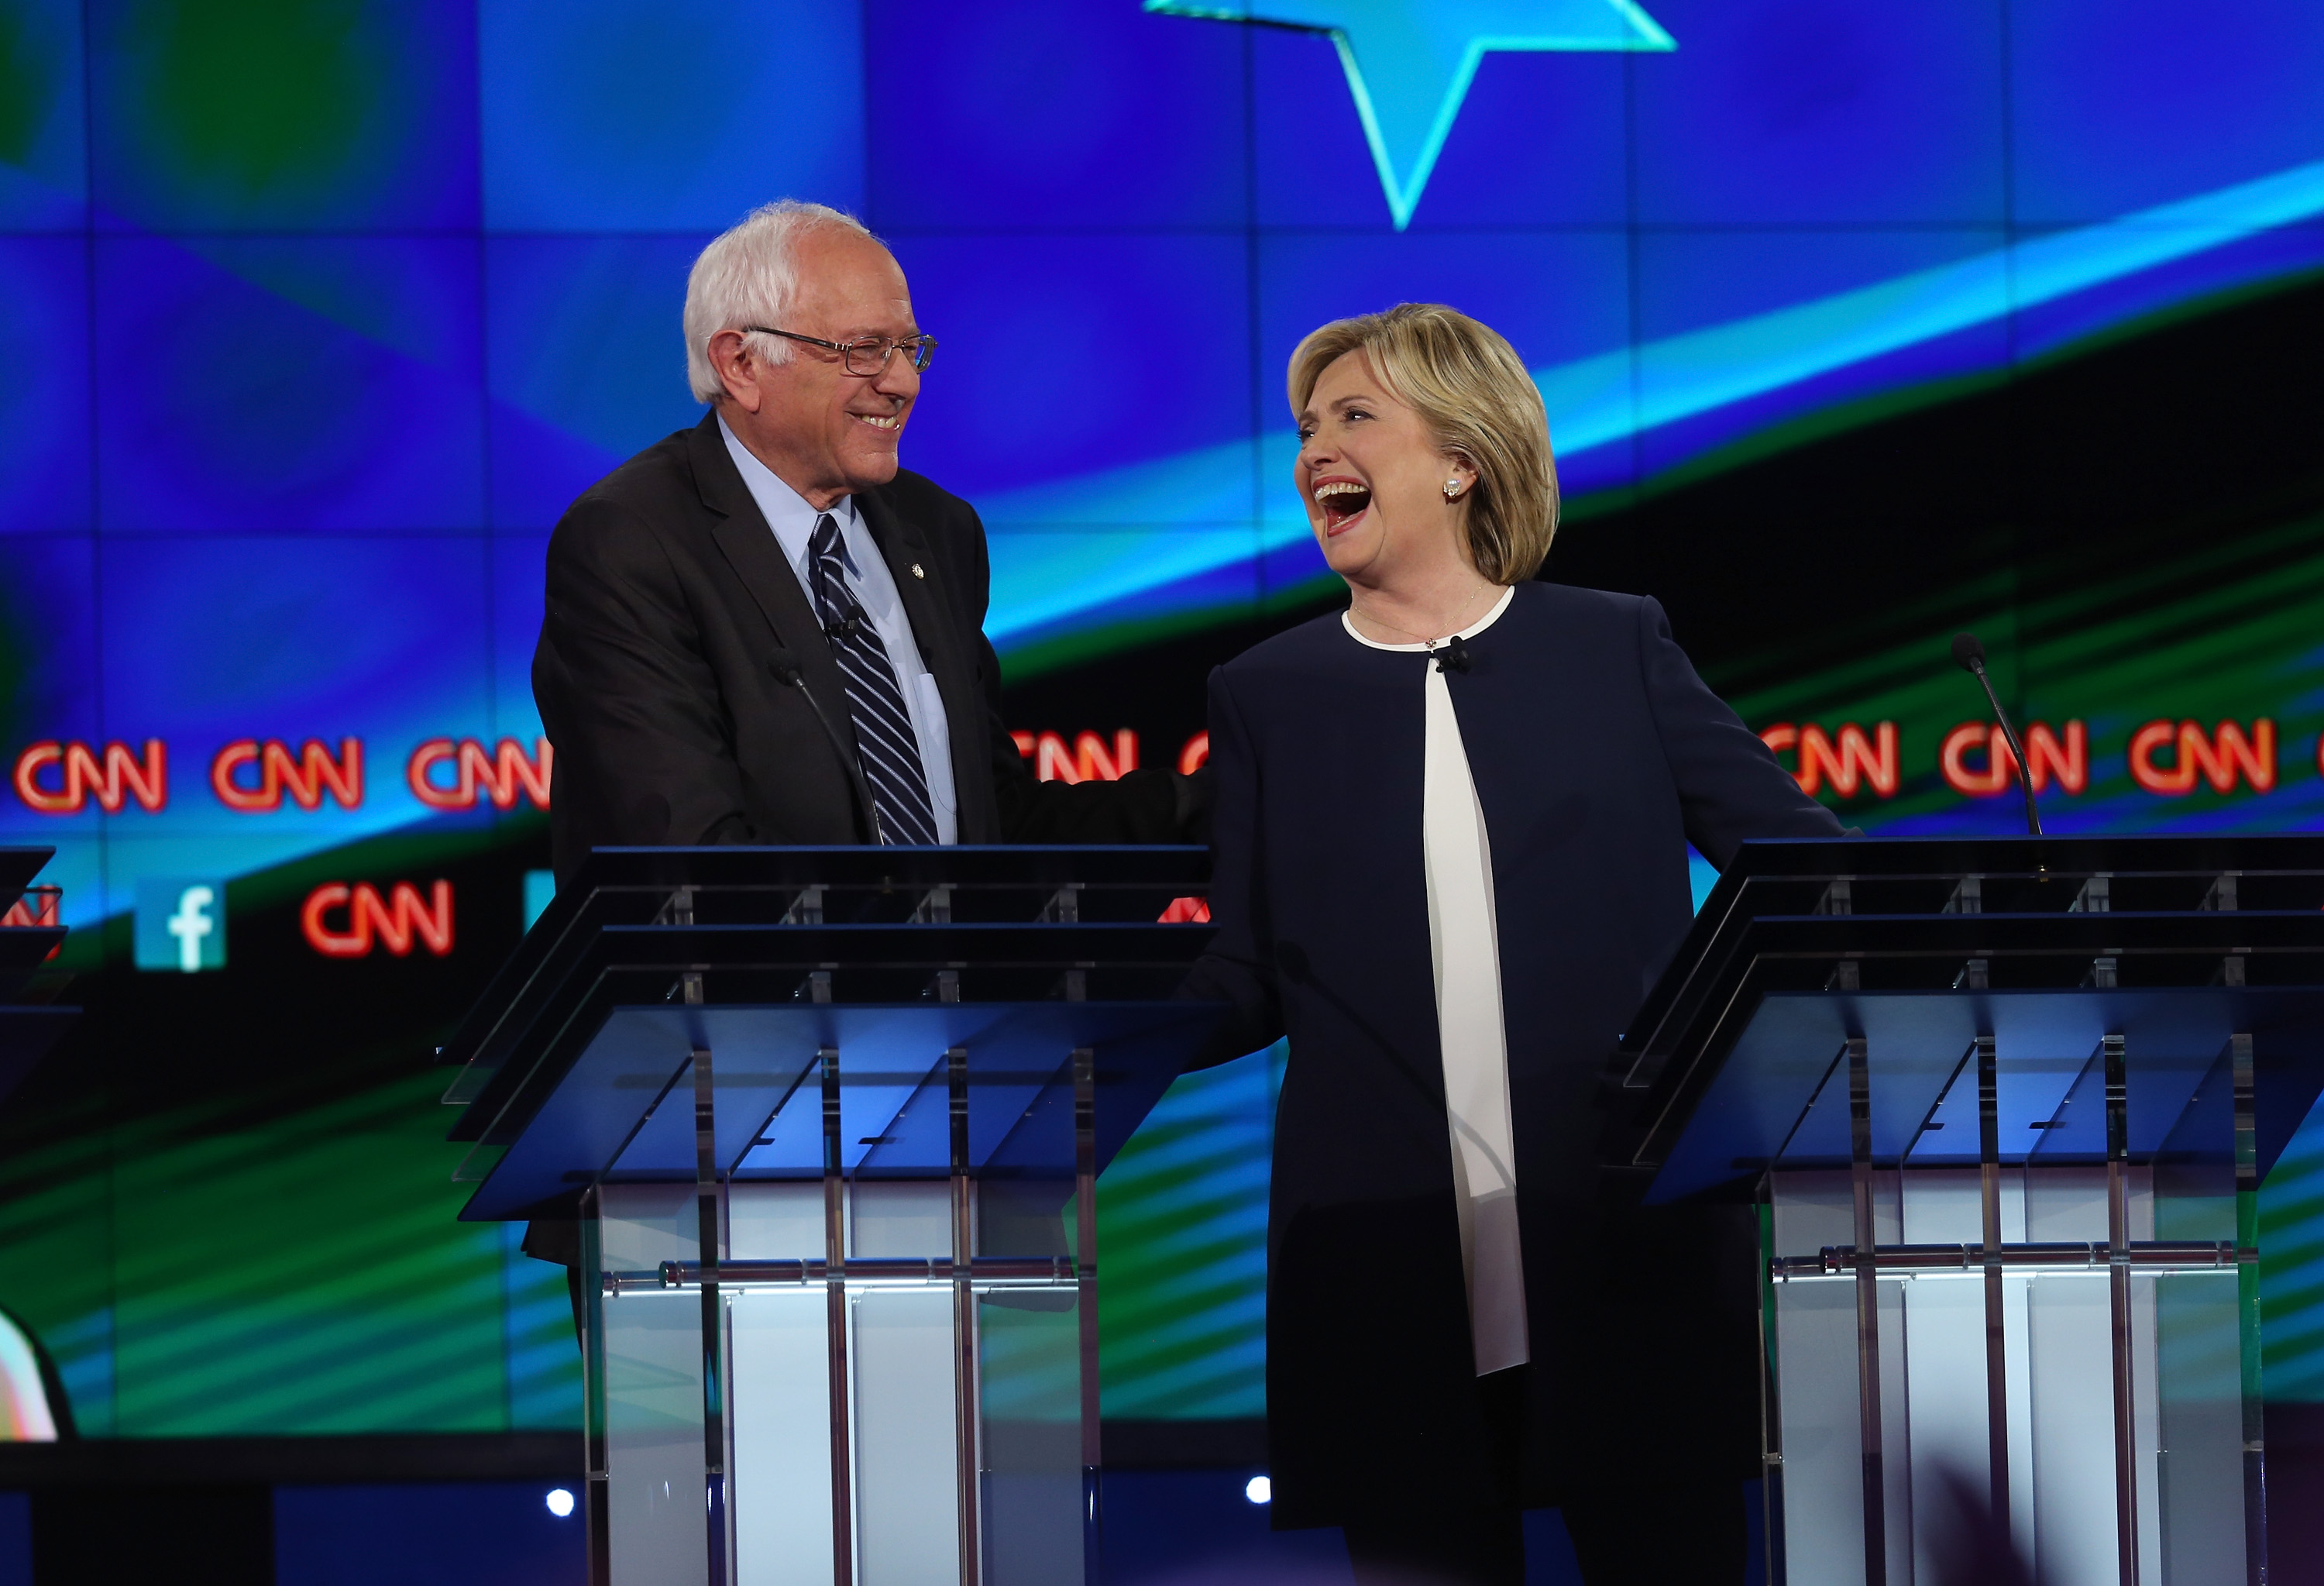 Hillary Clinton and Sen. Bernie Sanders jabbed more at their common enemies than each other